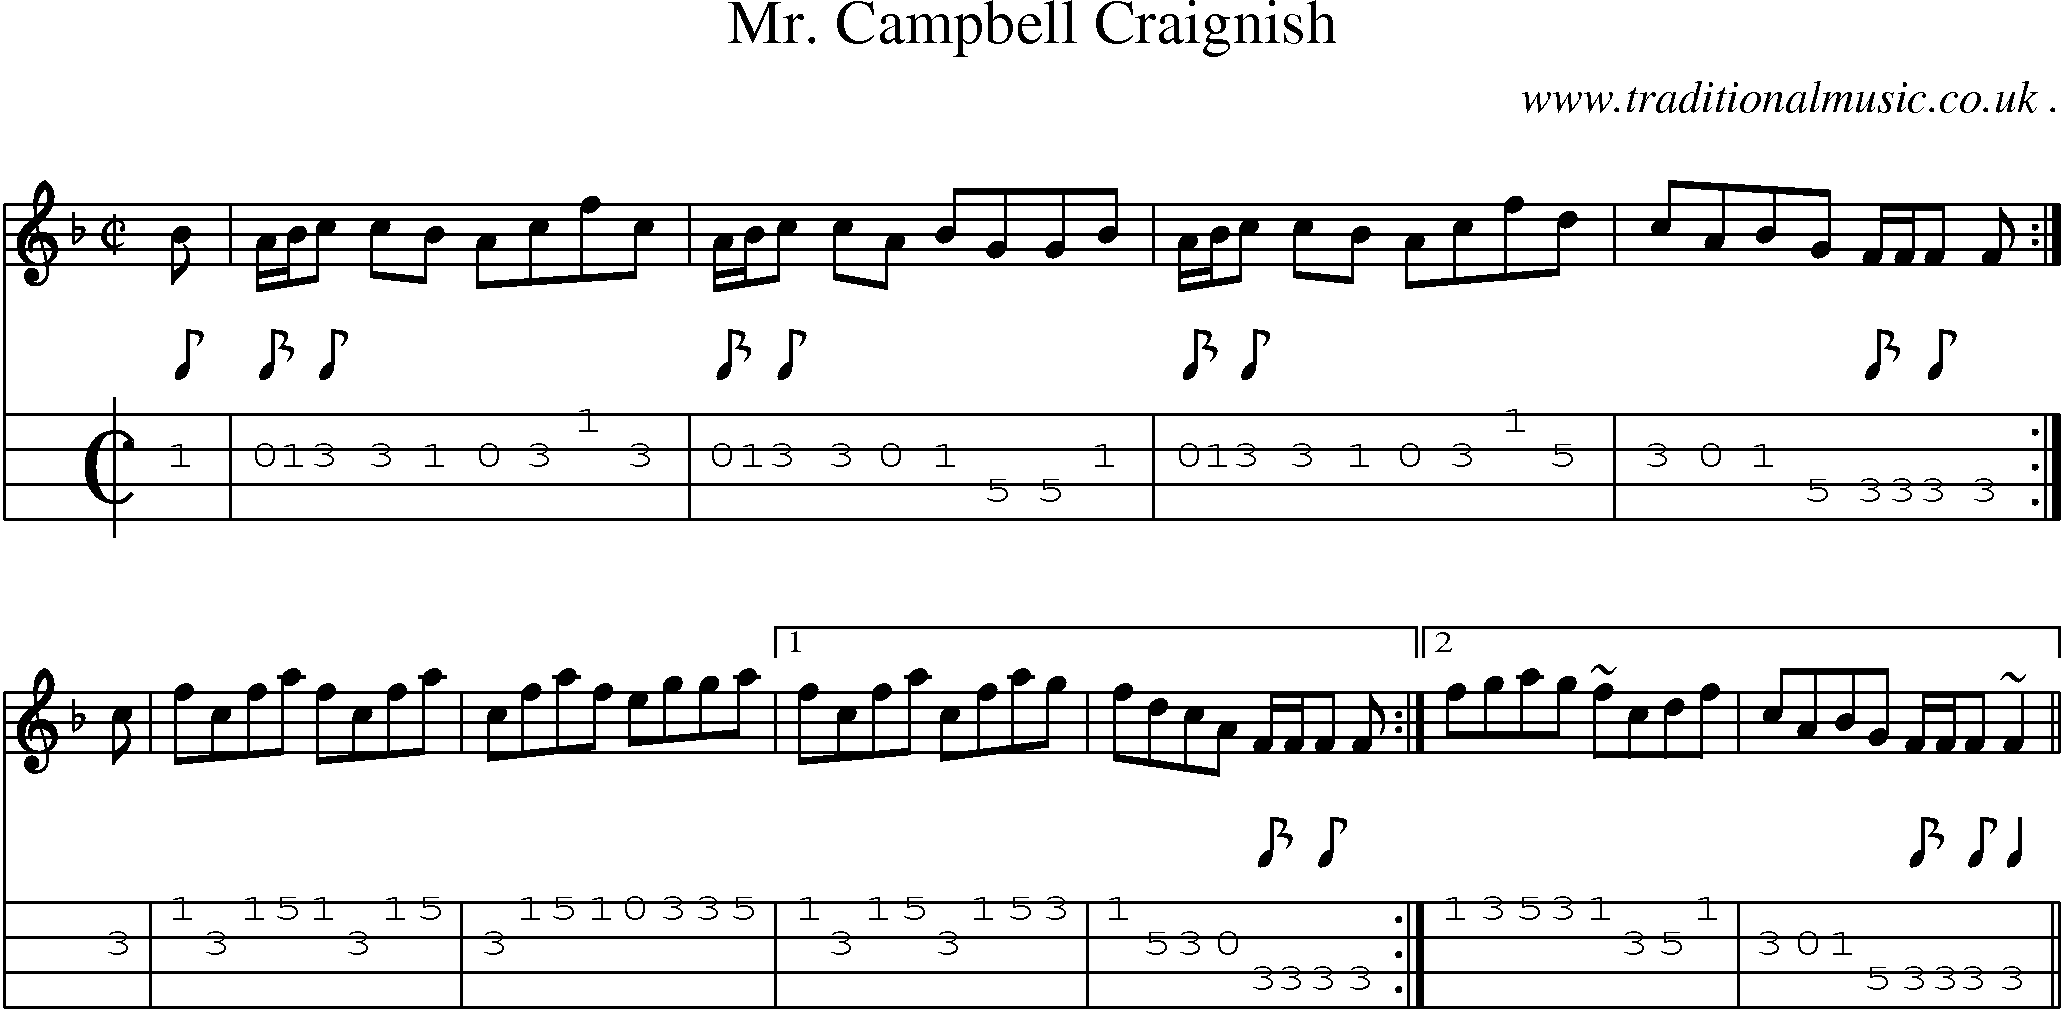 Sheet-music  score, Chords and Mandolin Tabs for Mr Campbell Craignish